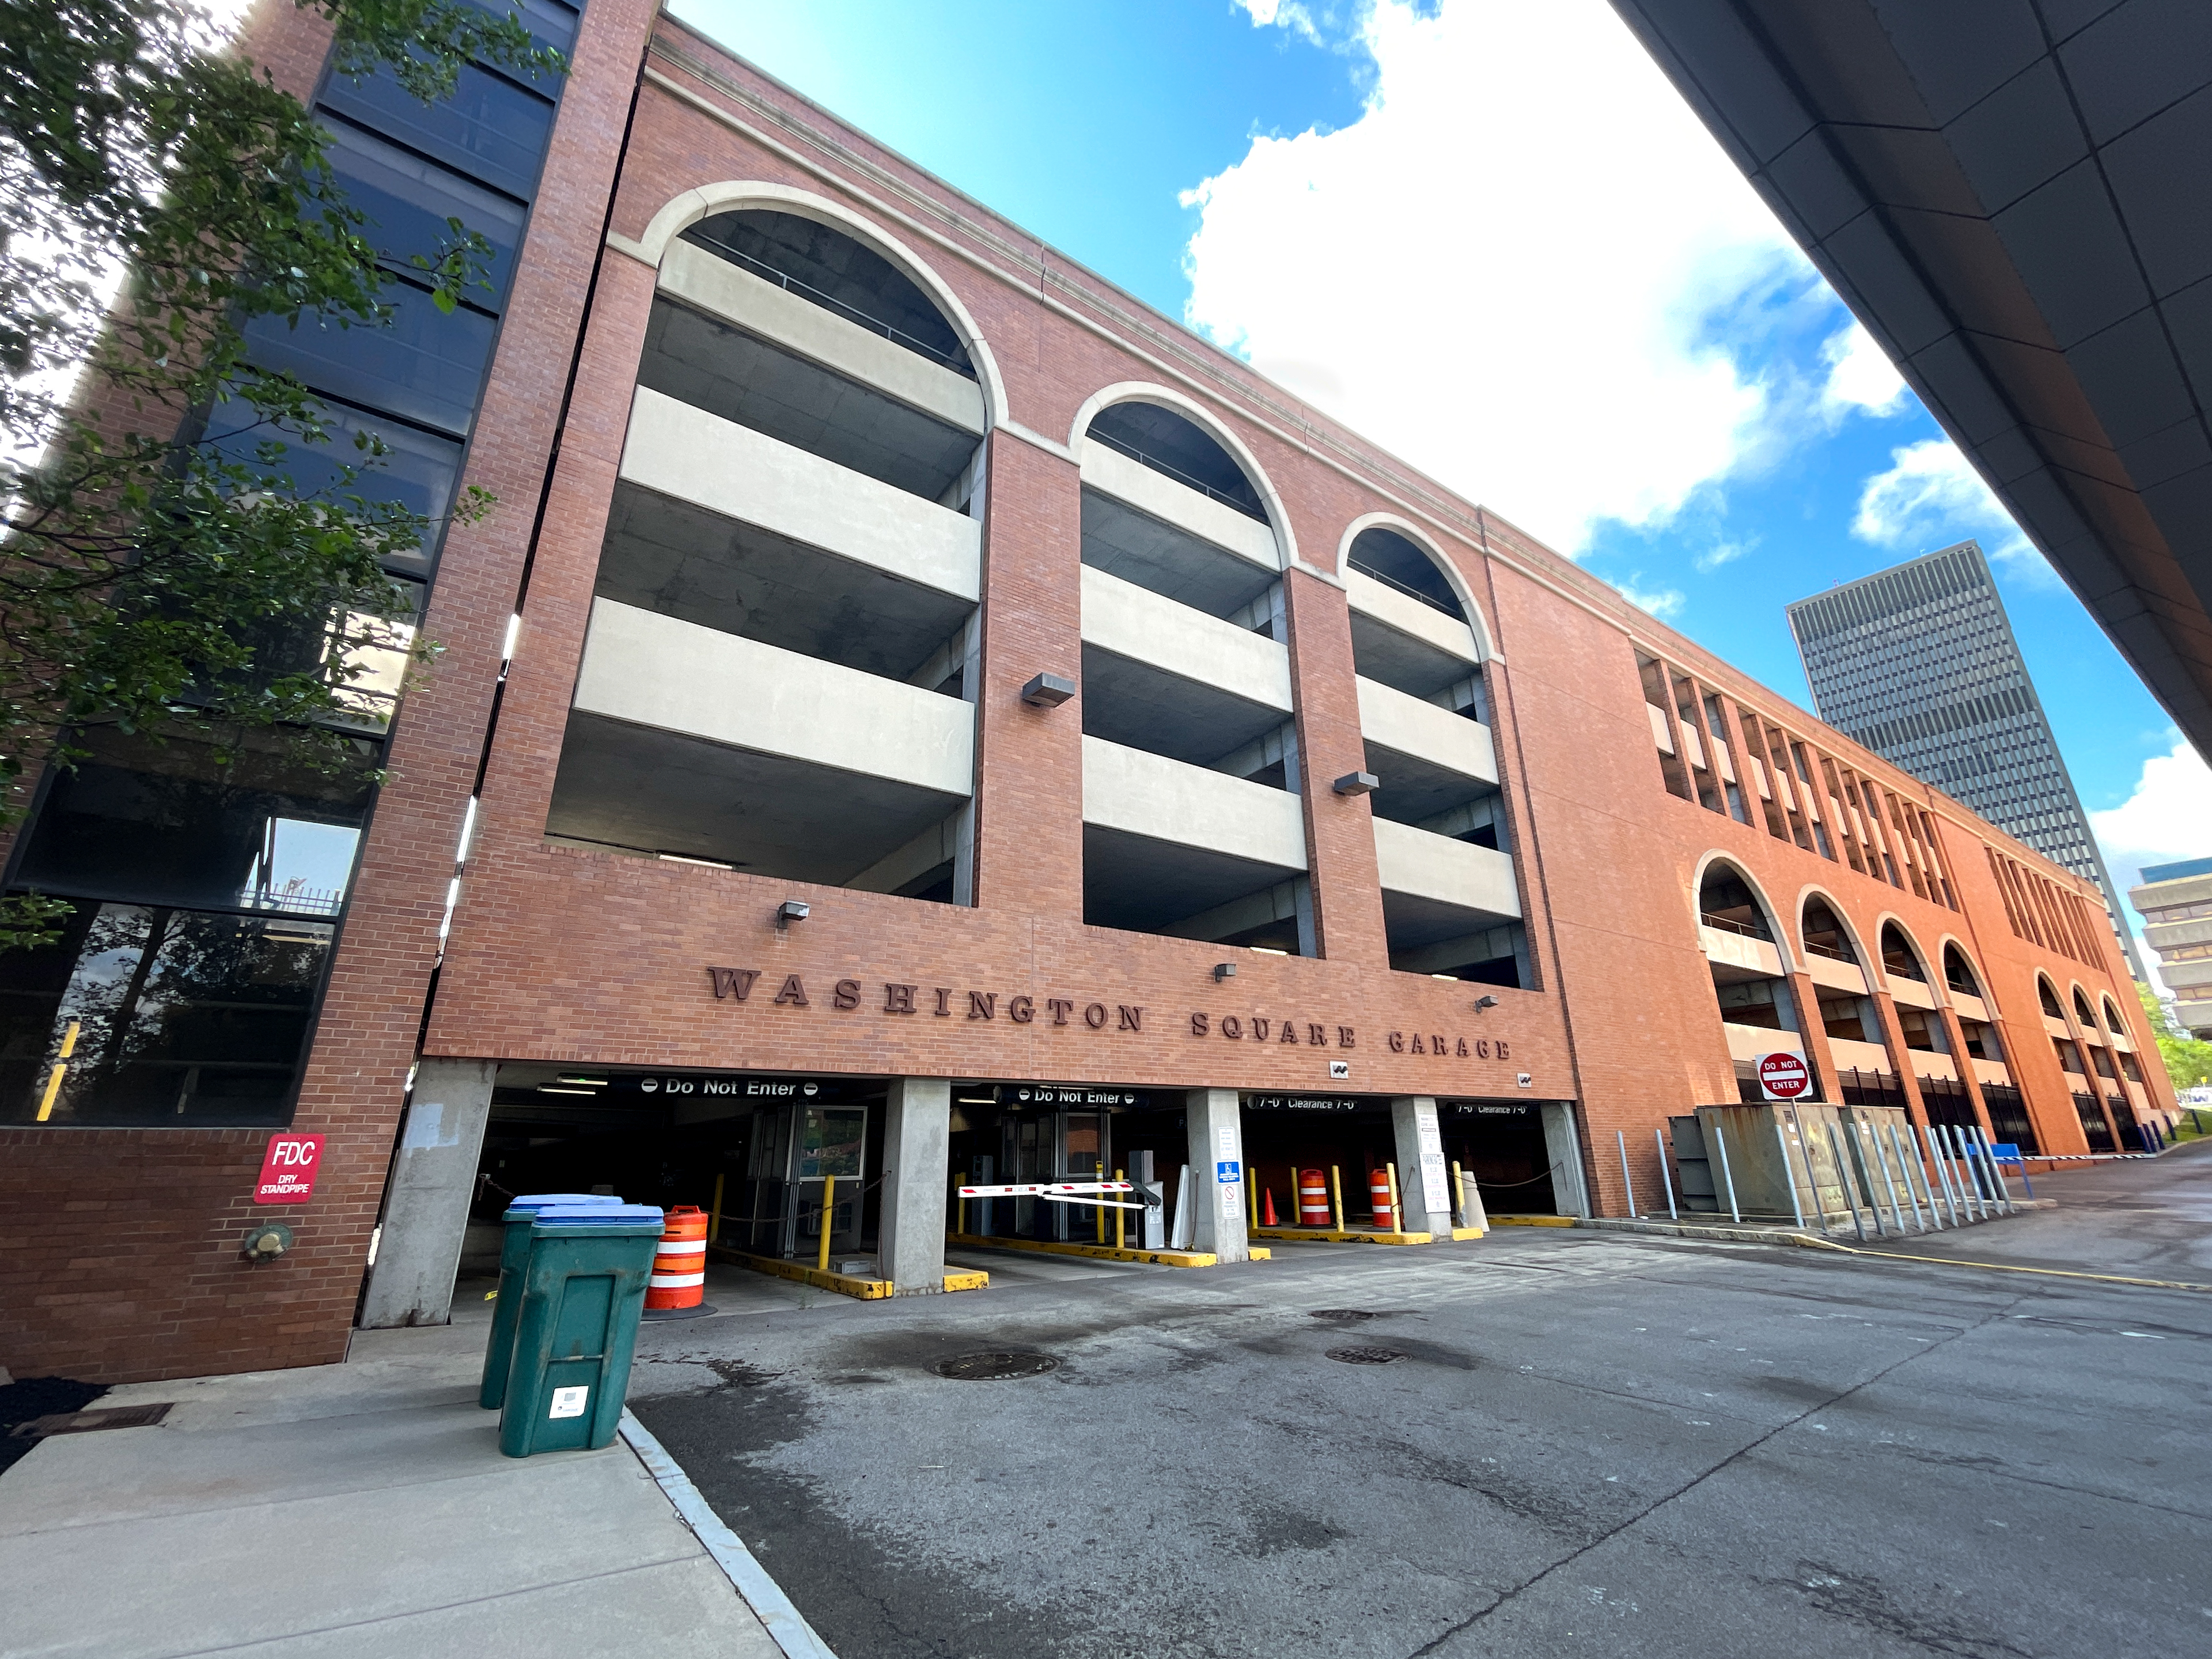 Photo of Washington Square Garage in Downtown Rochester.